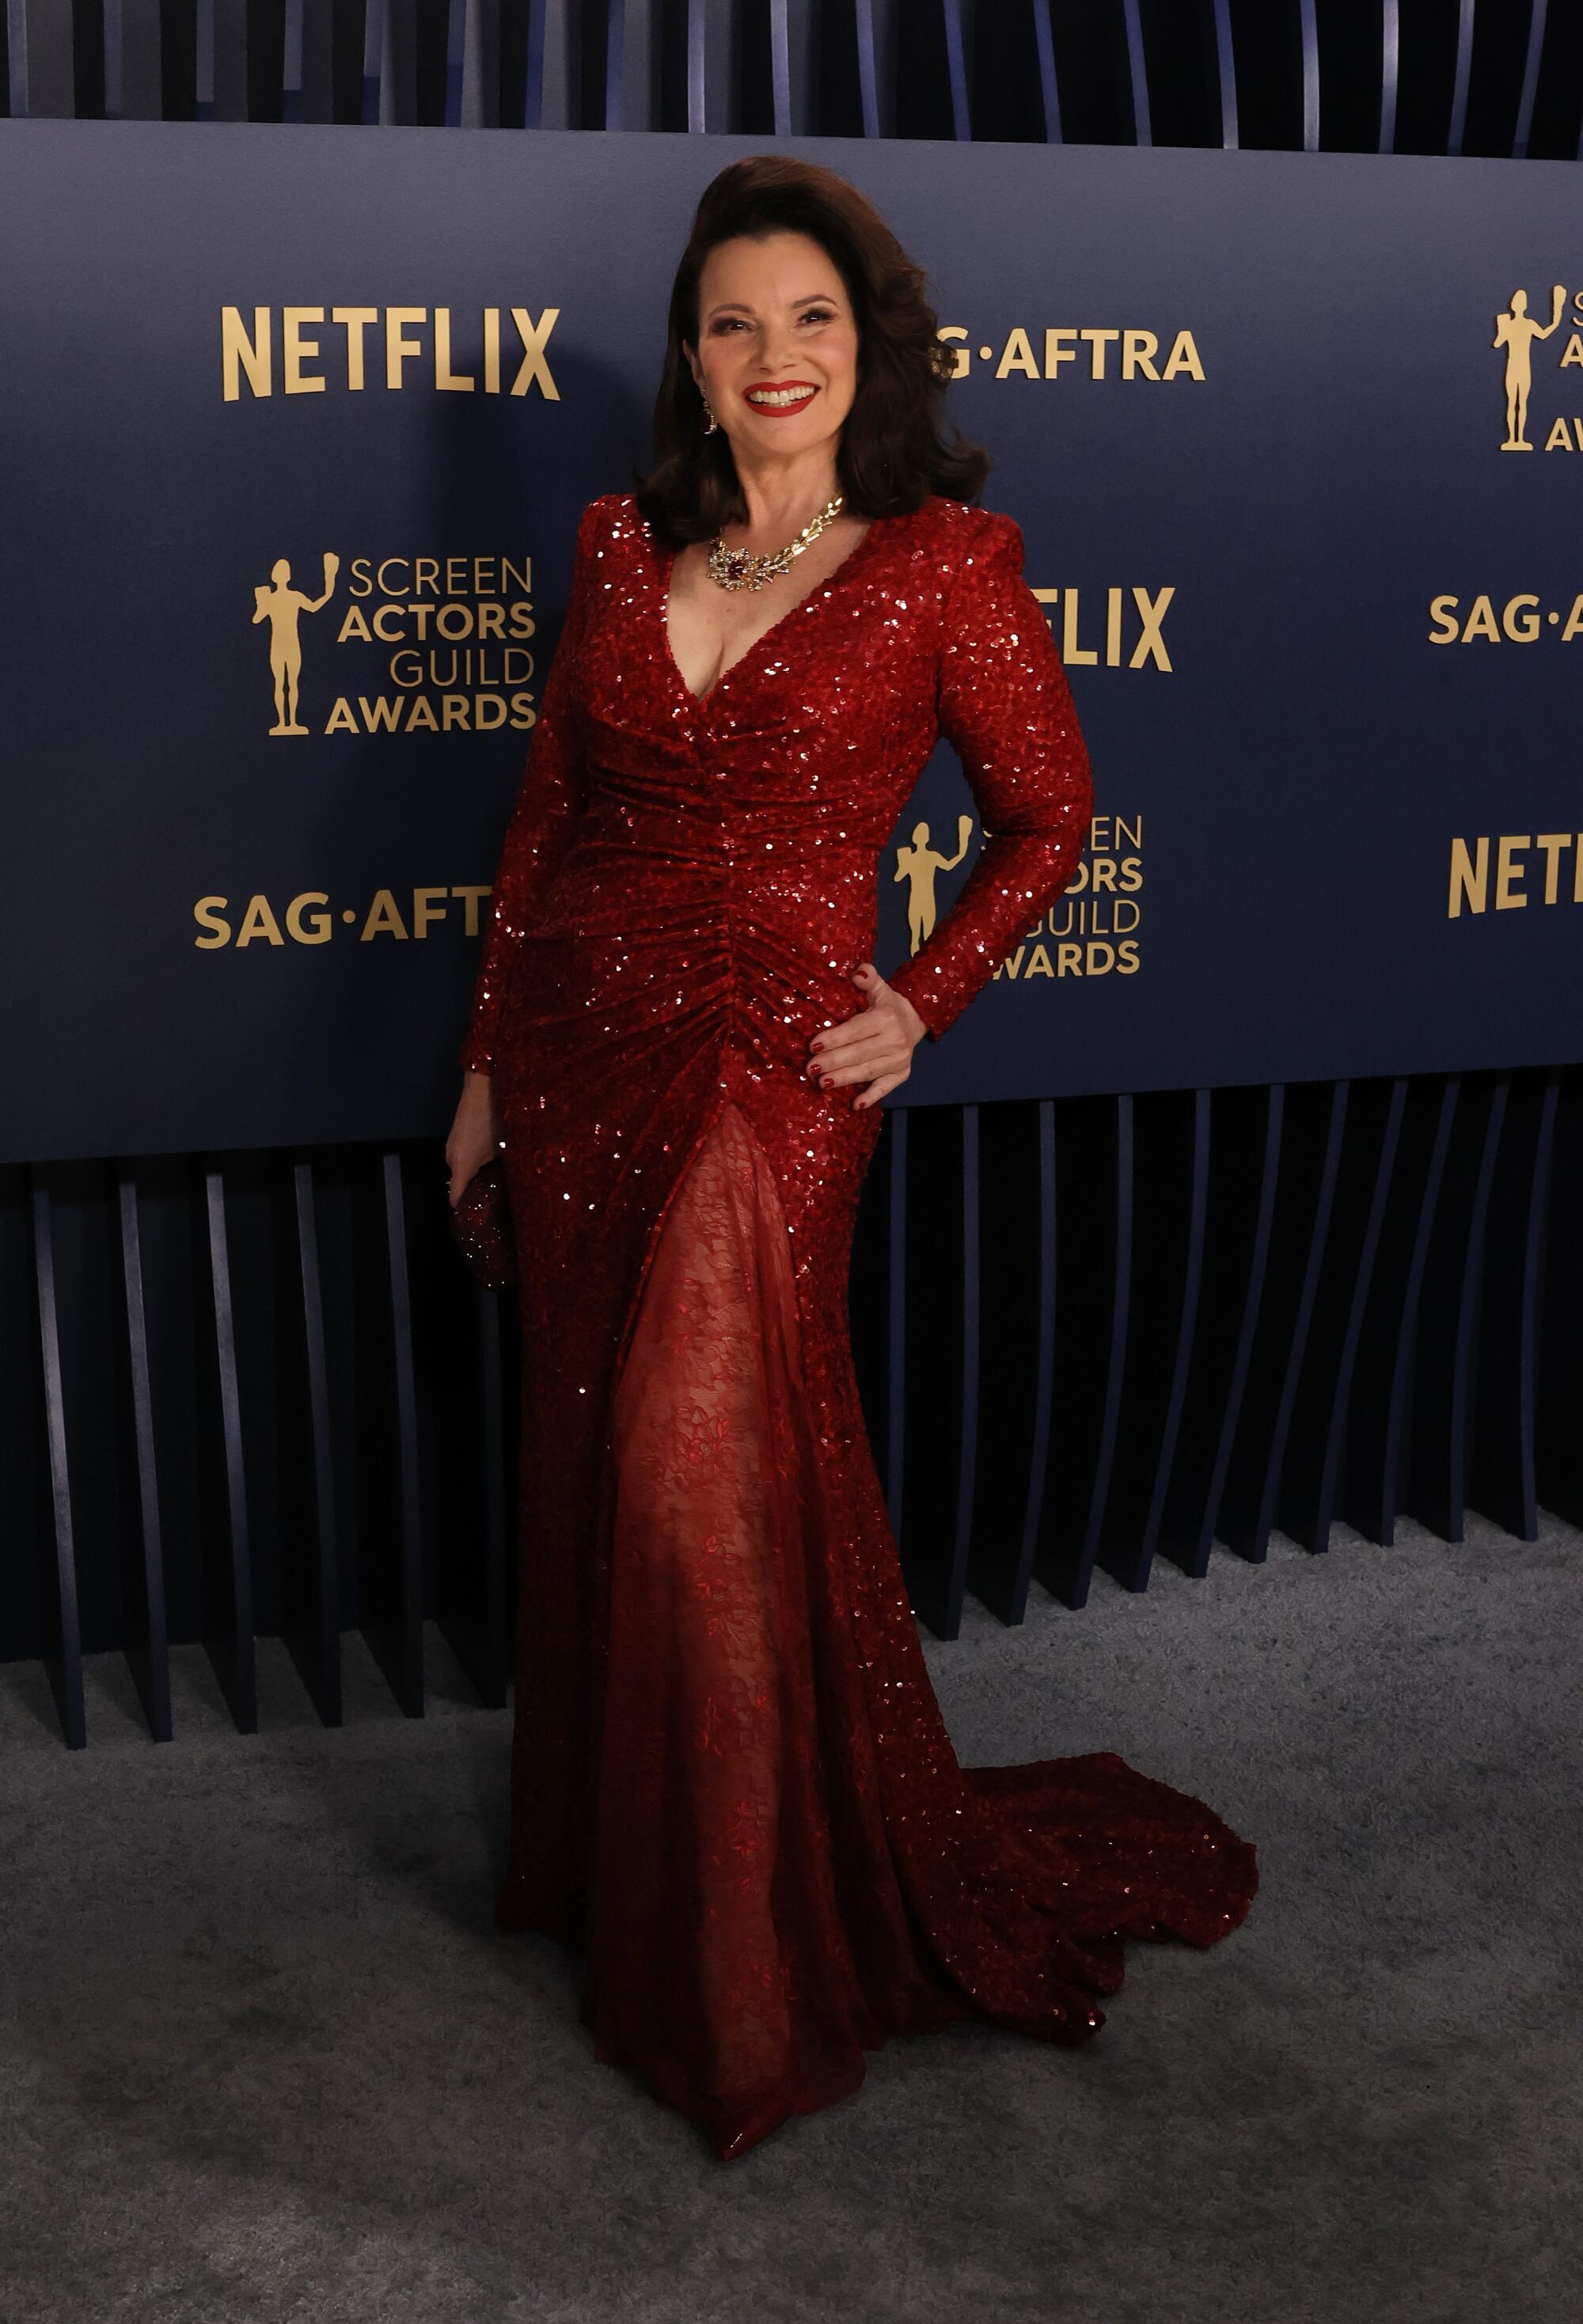 Fran Drescher wears a sequined red gown at the SAG Awards.